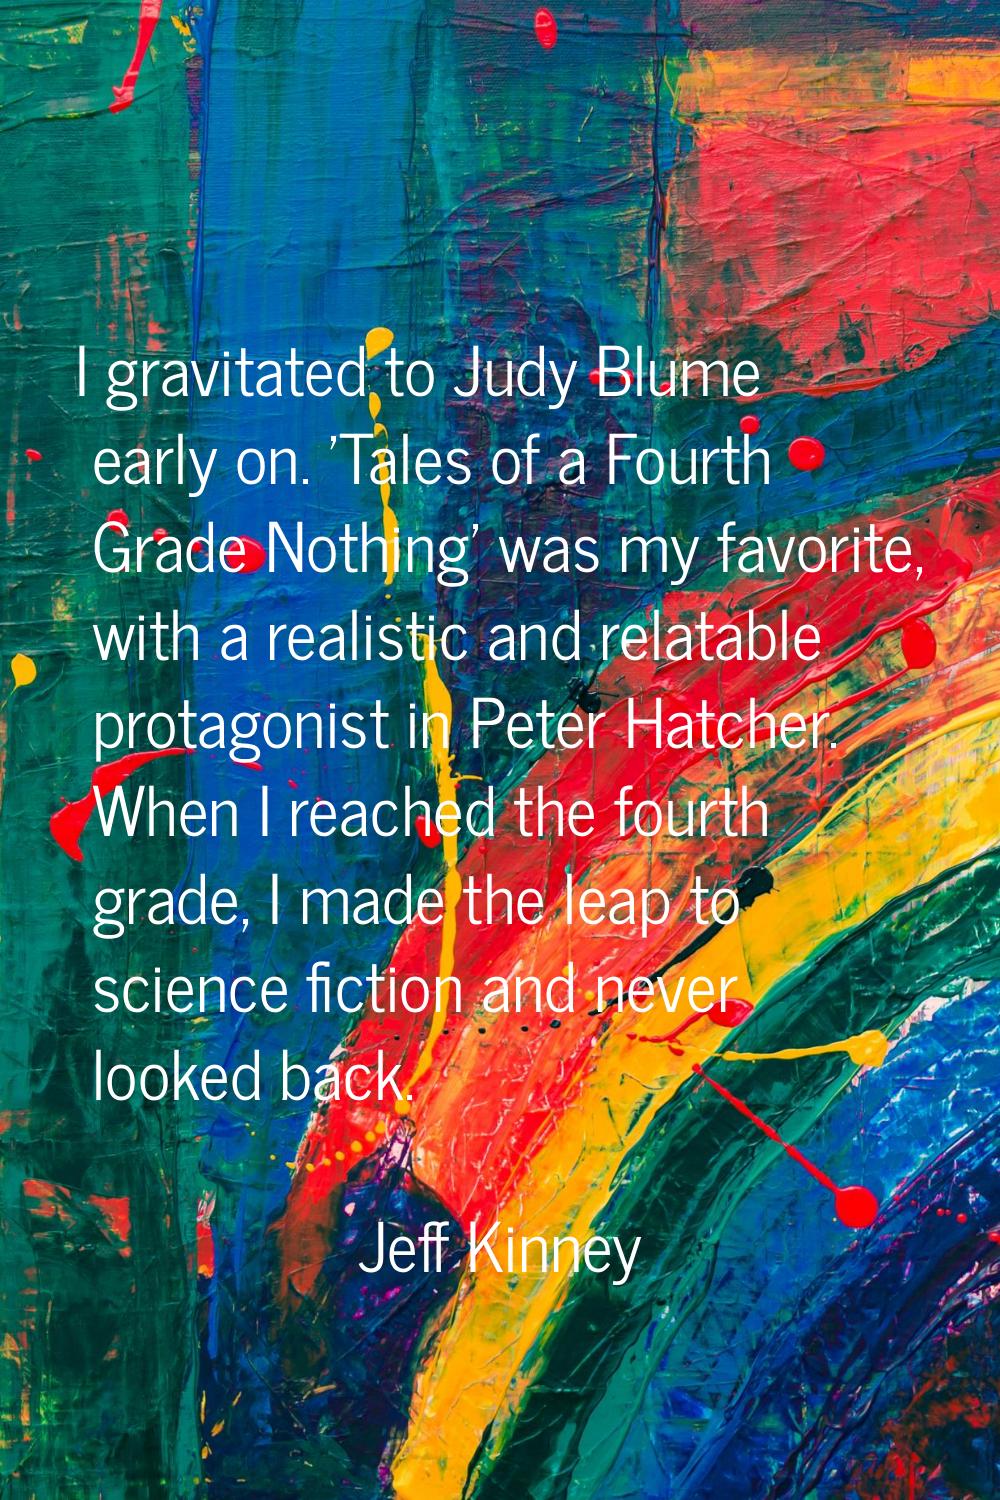 I gravitated to Judy Blume early on. 'Tales of a Fourth Grade Nothing' was my favorite, with a real